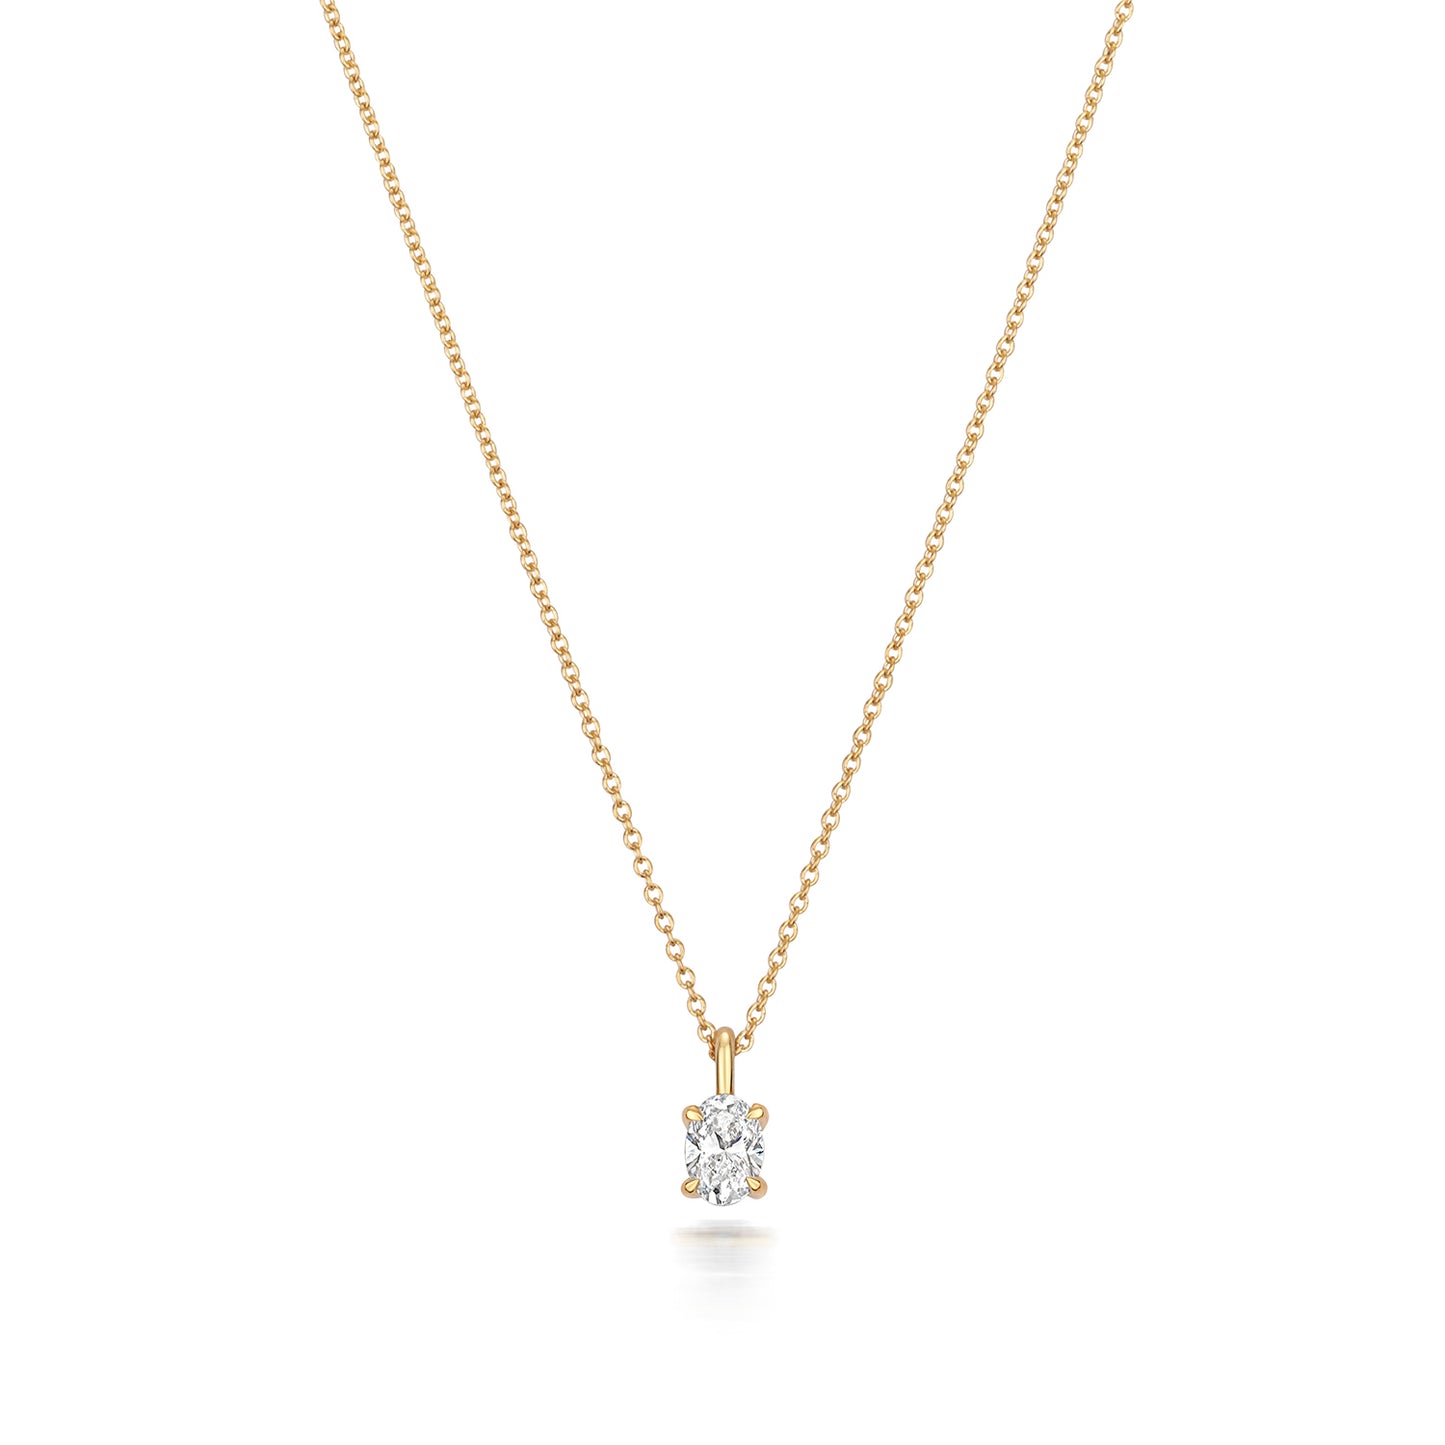 Oval Shaped Diamond Necklace in Yellow Gold on white background.